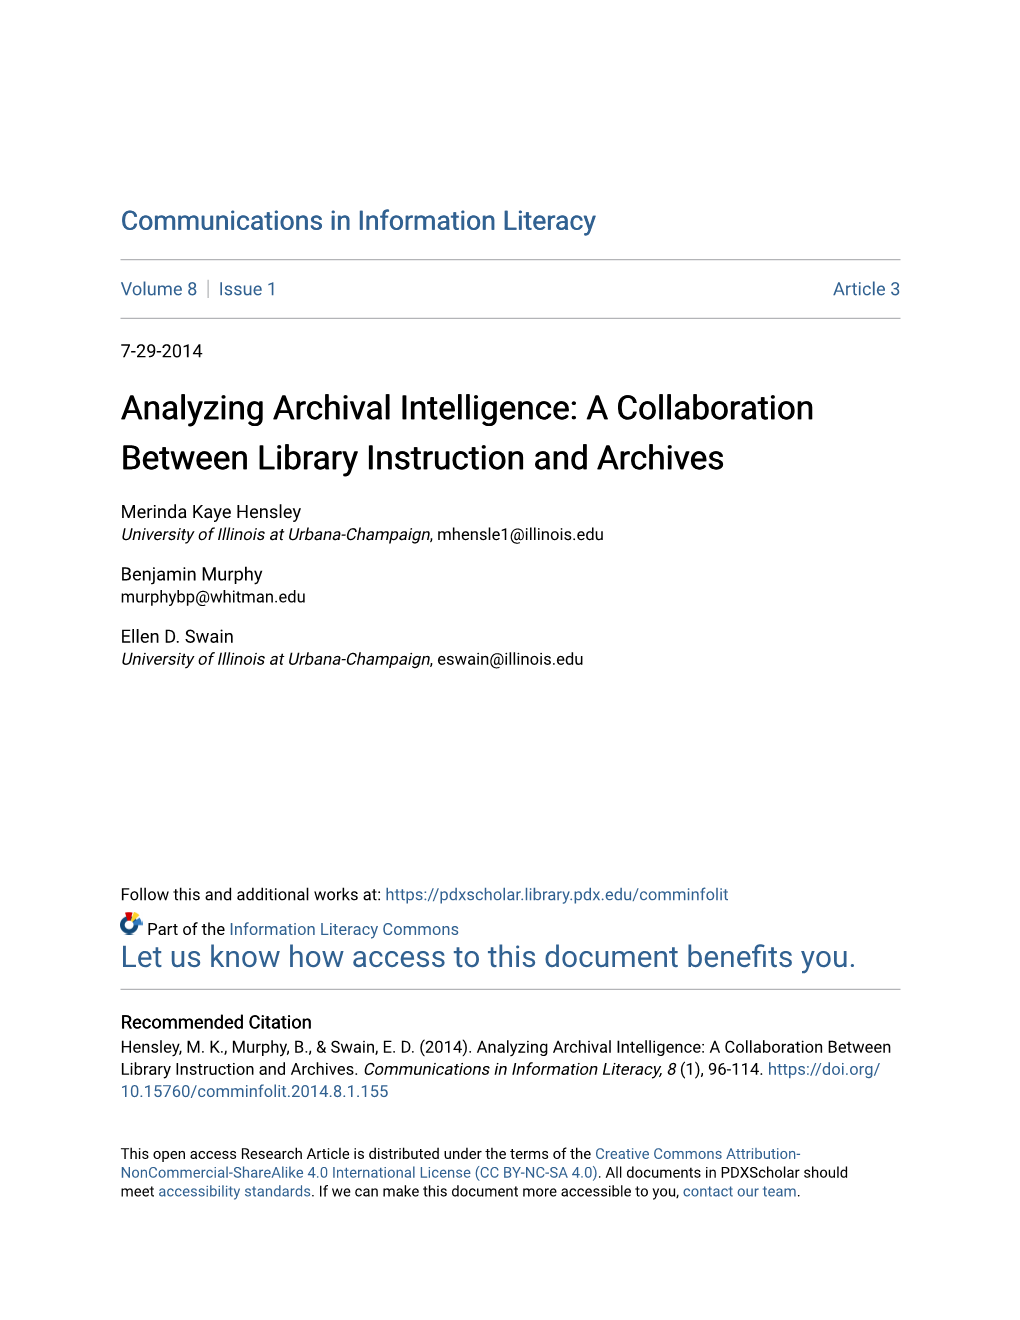 Analyzing Archival Intelligence: a Collaboration Between Library Instruction and Archives